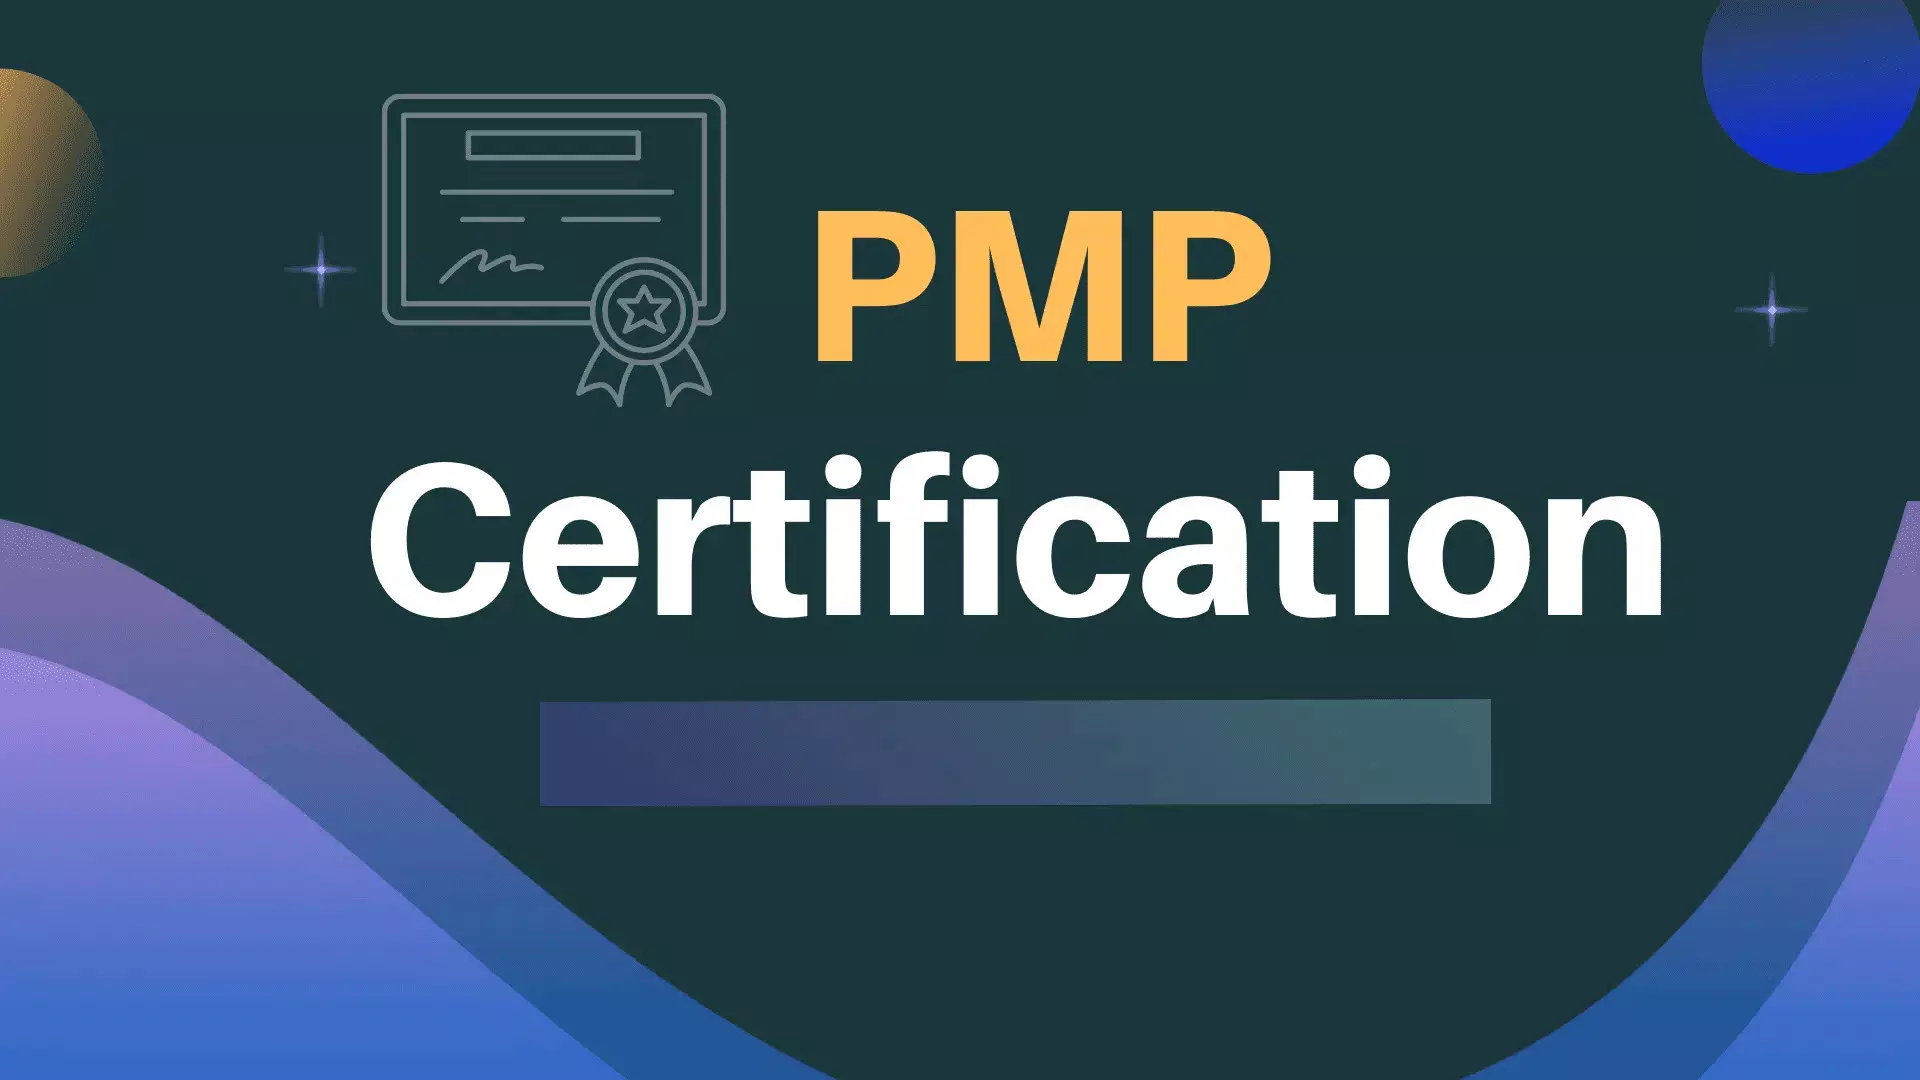 PMP certification pays off 35% higher: Survey